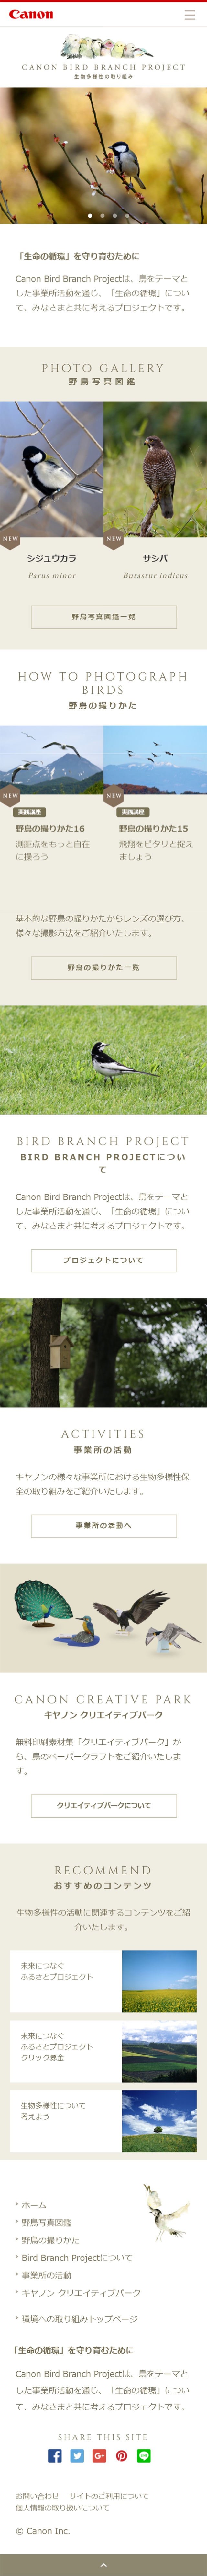 CANON BIRD BRANCH PROJECT_sp_1